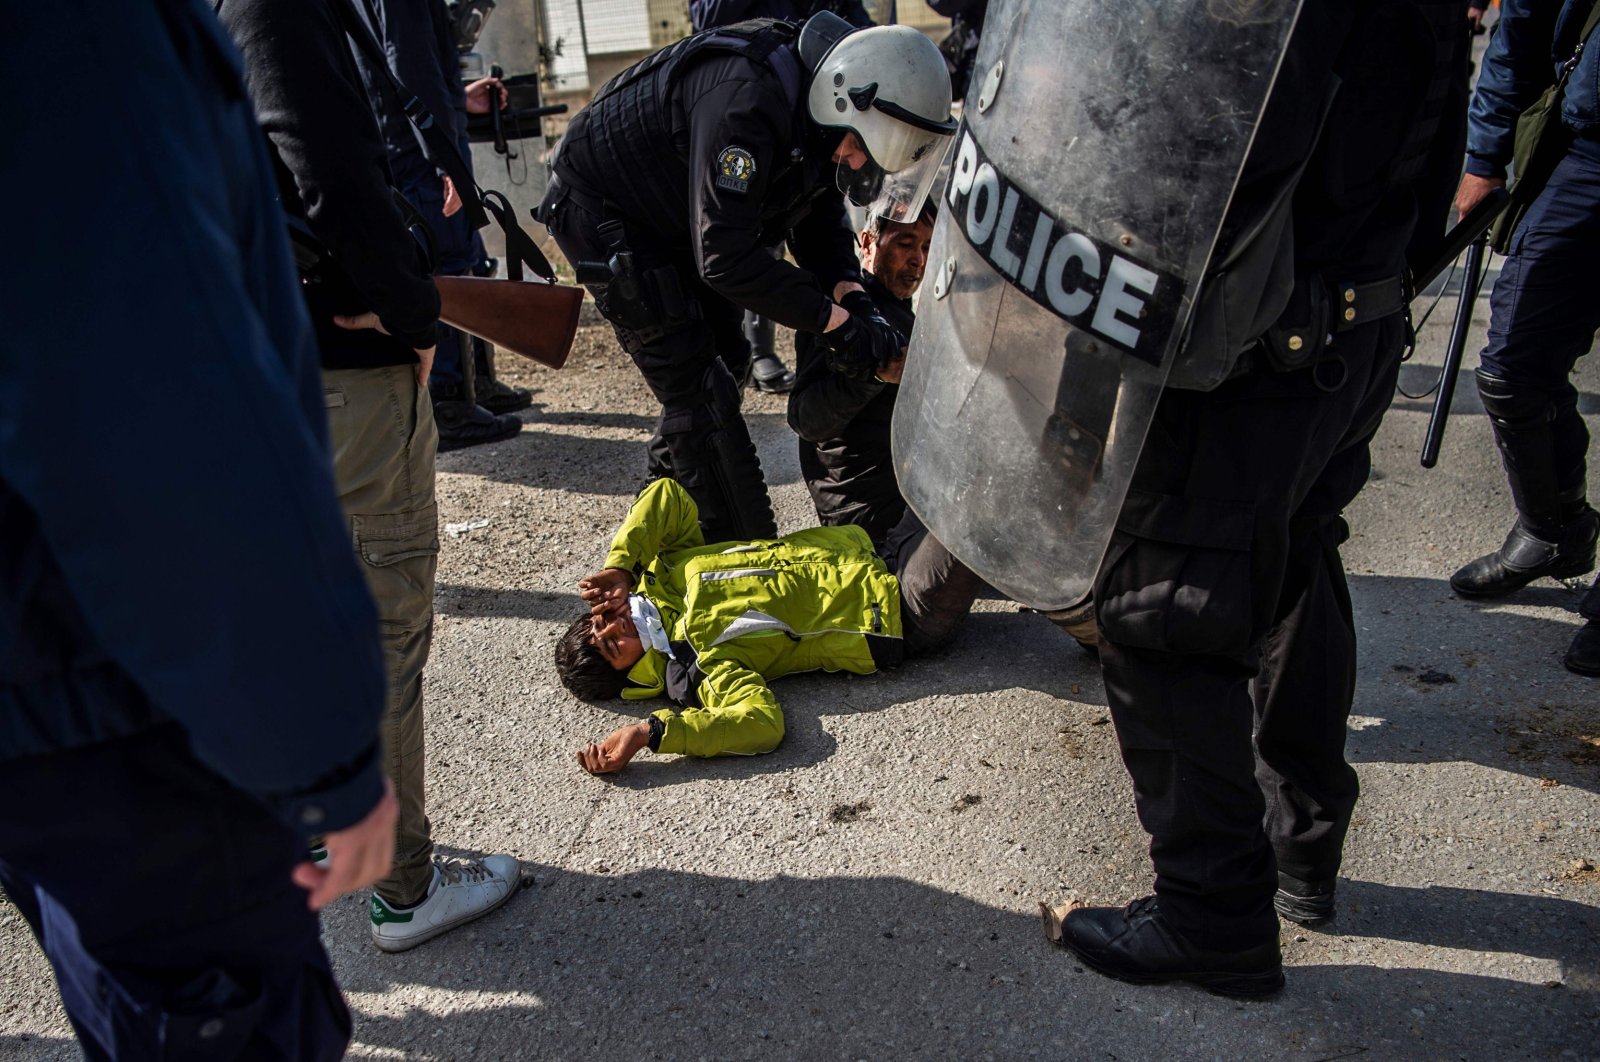 Riot police detain a migrant during clashes near the Moria camp for refugees and migrants, on the island of Lesbos, Greece, March 2, 2020. (AFP Photo)